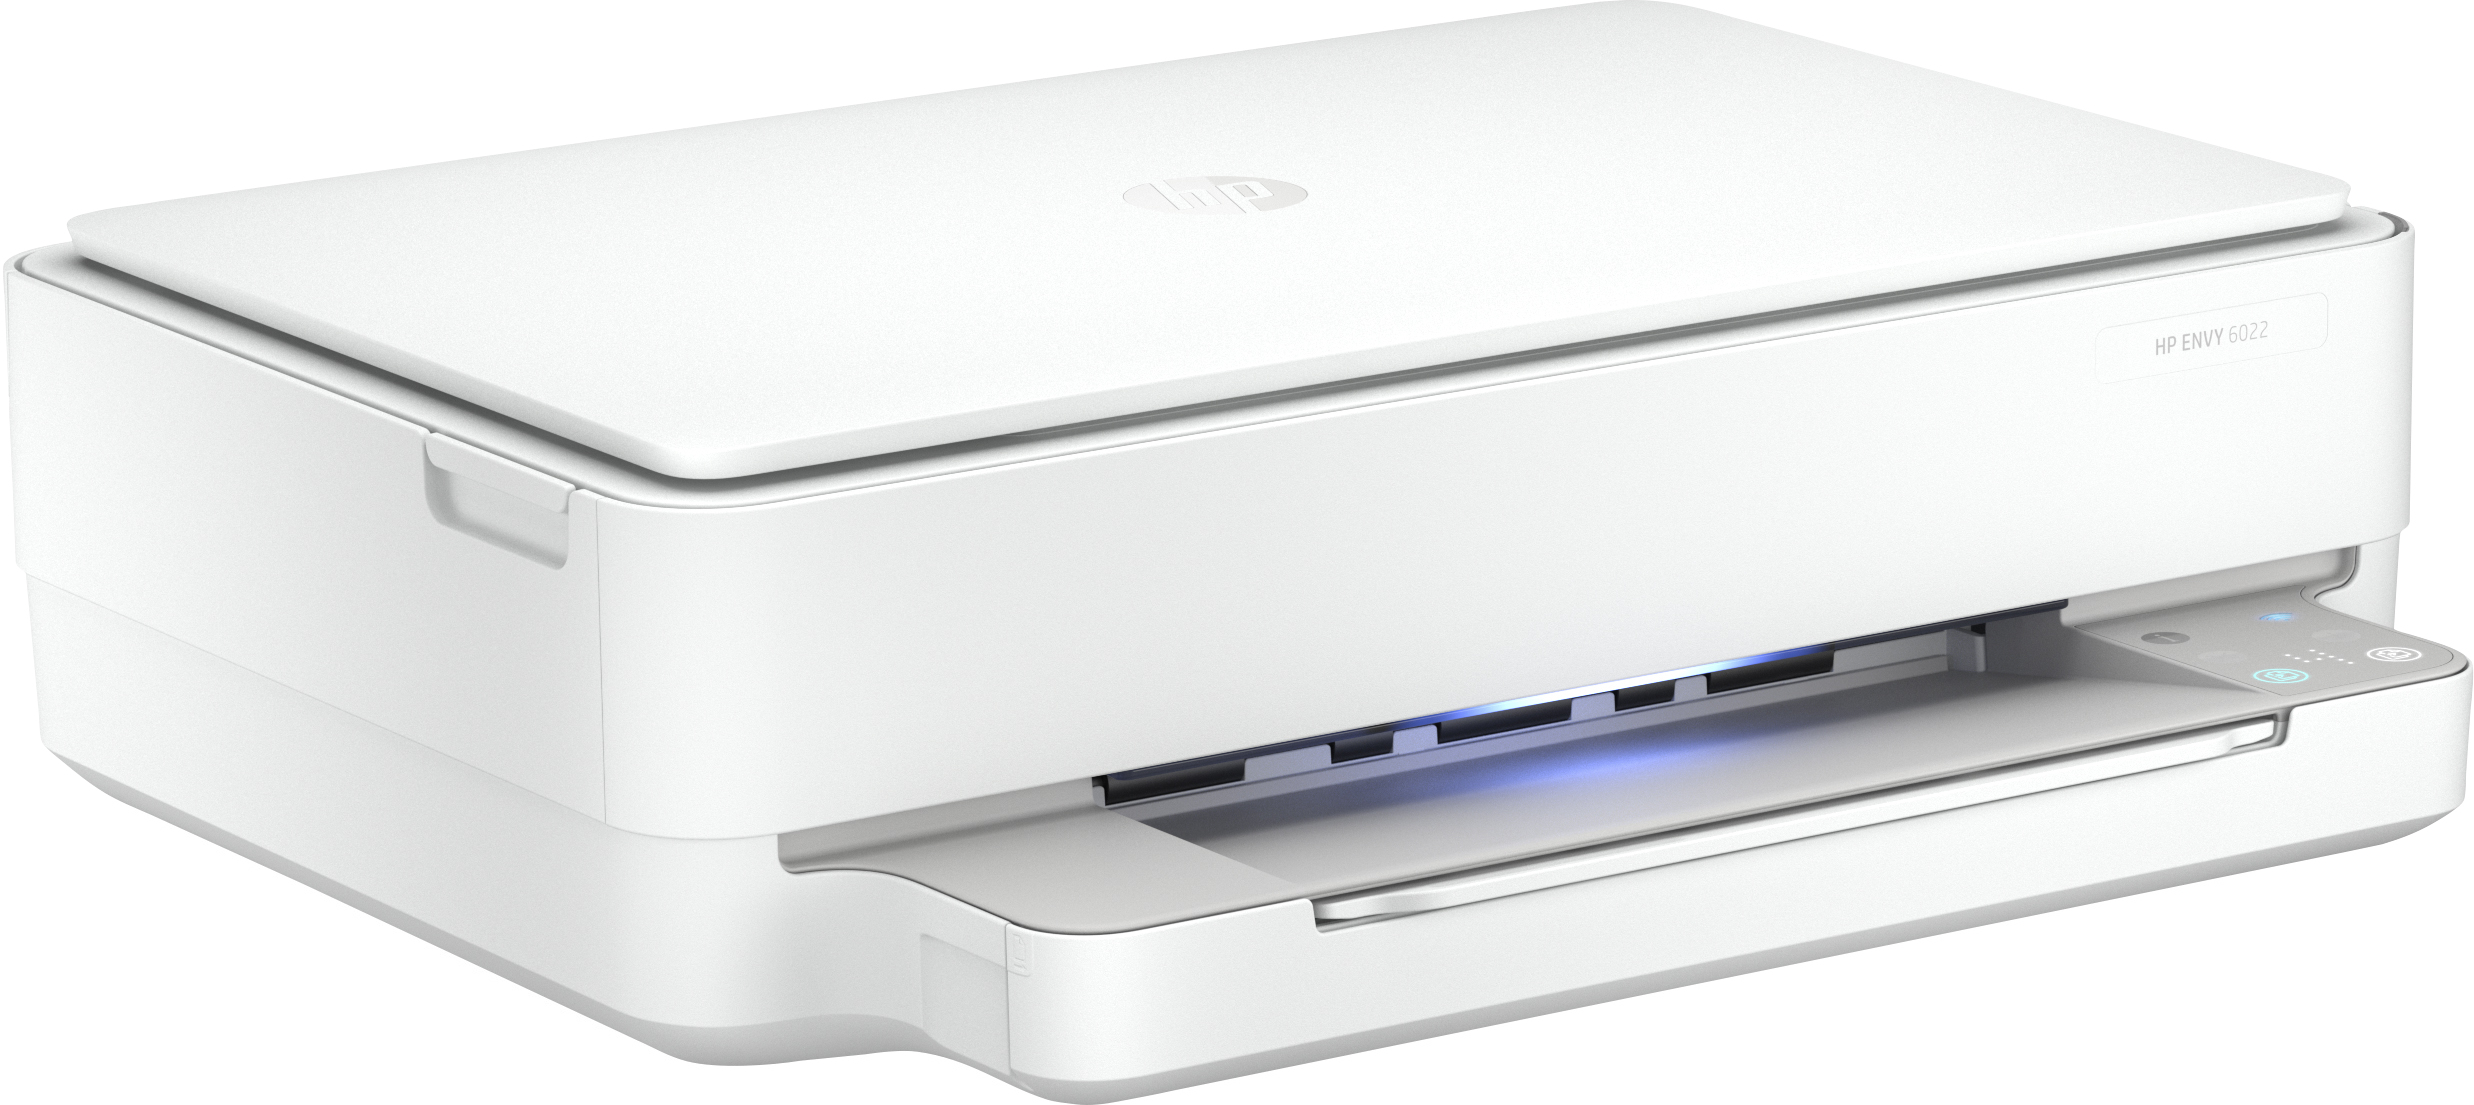 Hp Envy 6022 All In One Color Printer Print Scan Copy Usb Wifi Bluetooth Shs Computer 6051